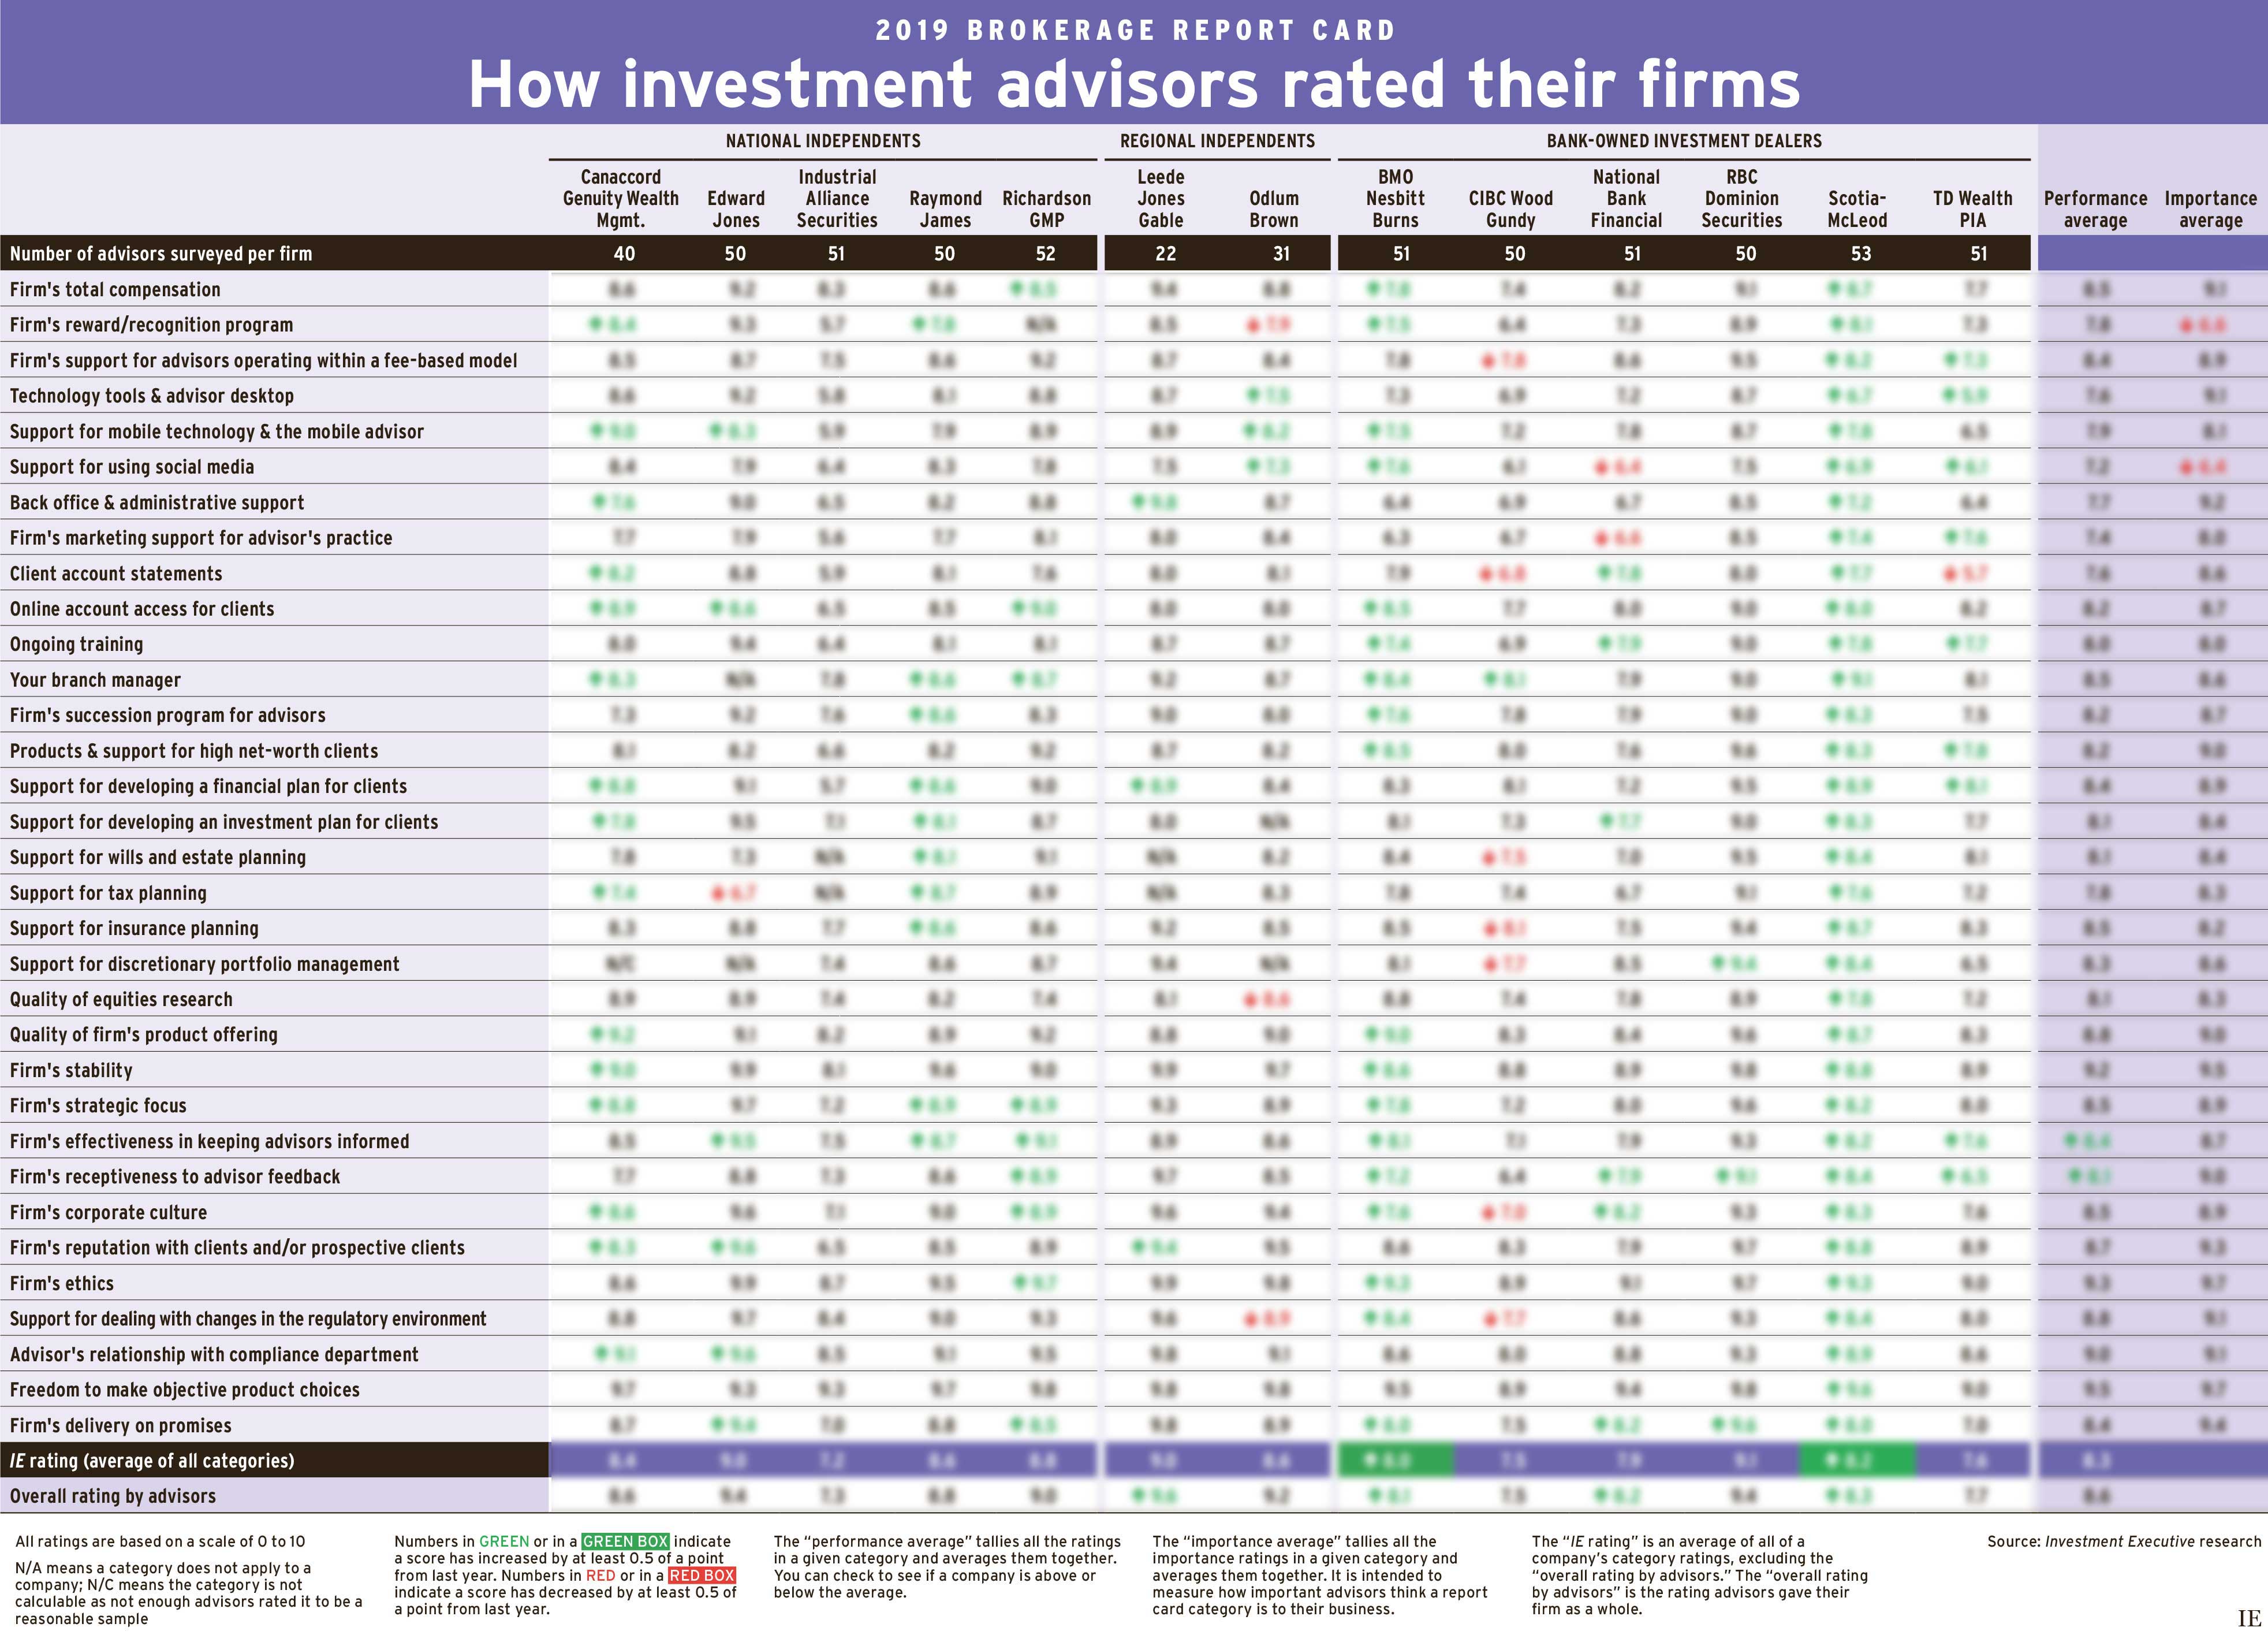 Table: How investment advisors rated their firms